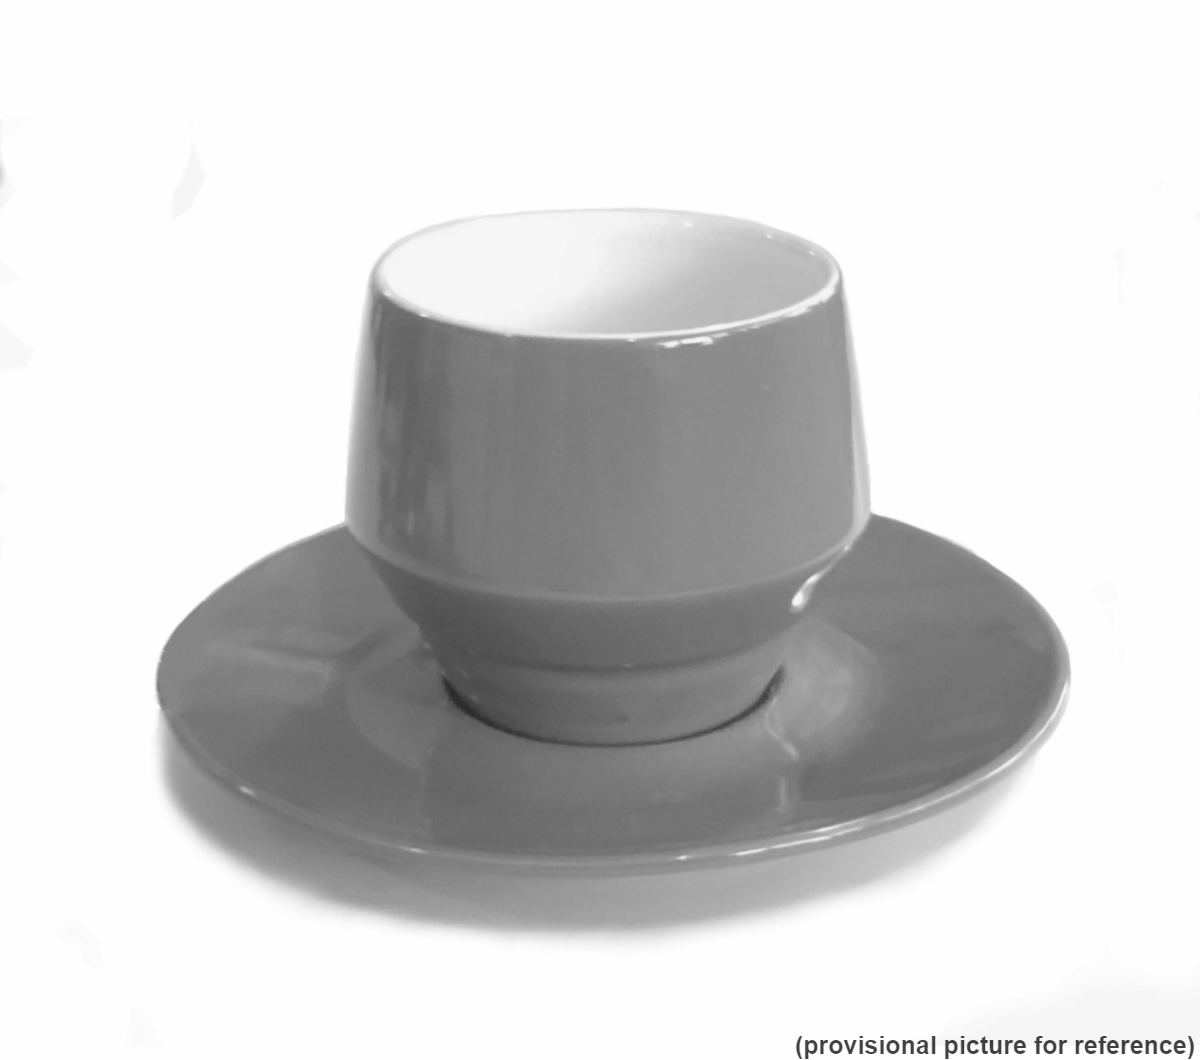 "MANIKO" Double-Walled GREY - 205ml Cappuccino Cups